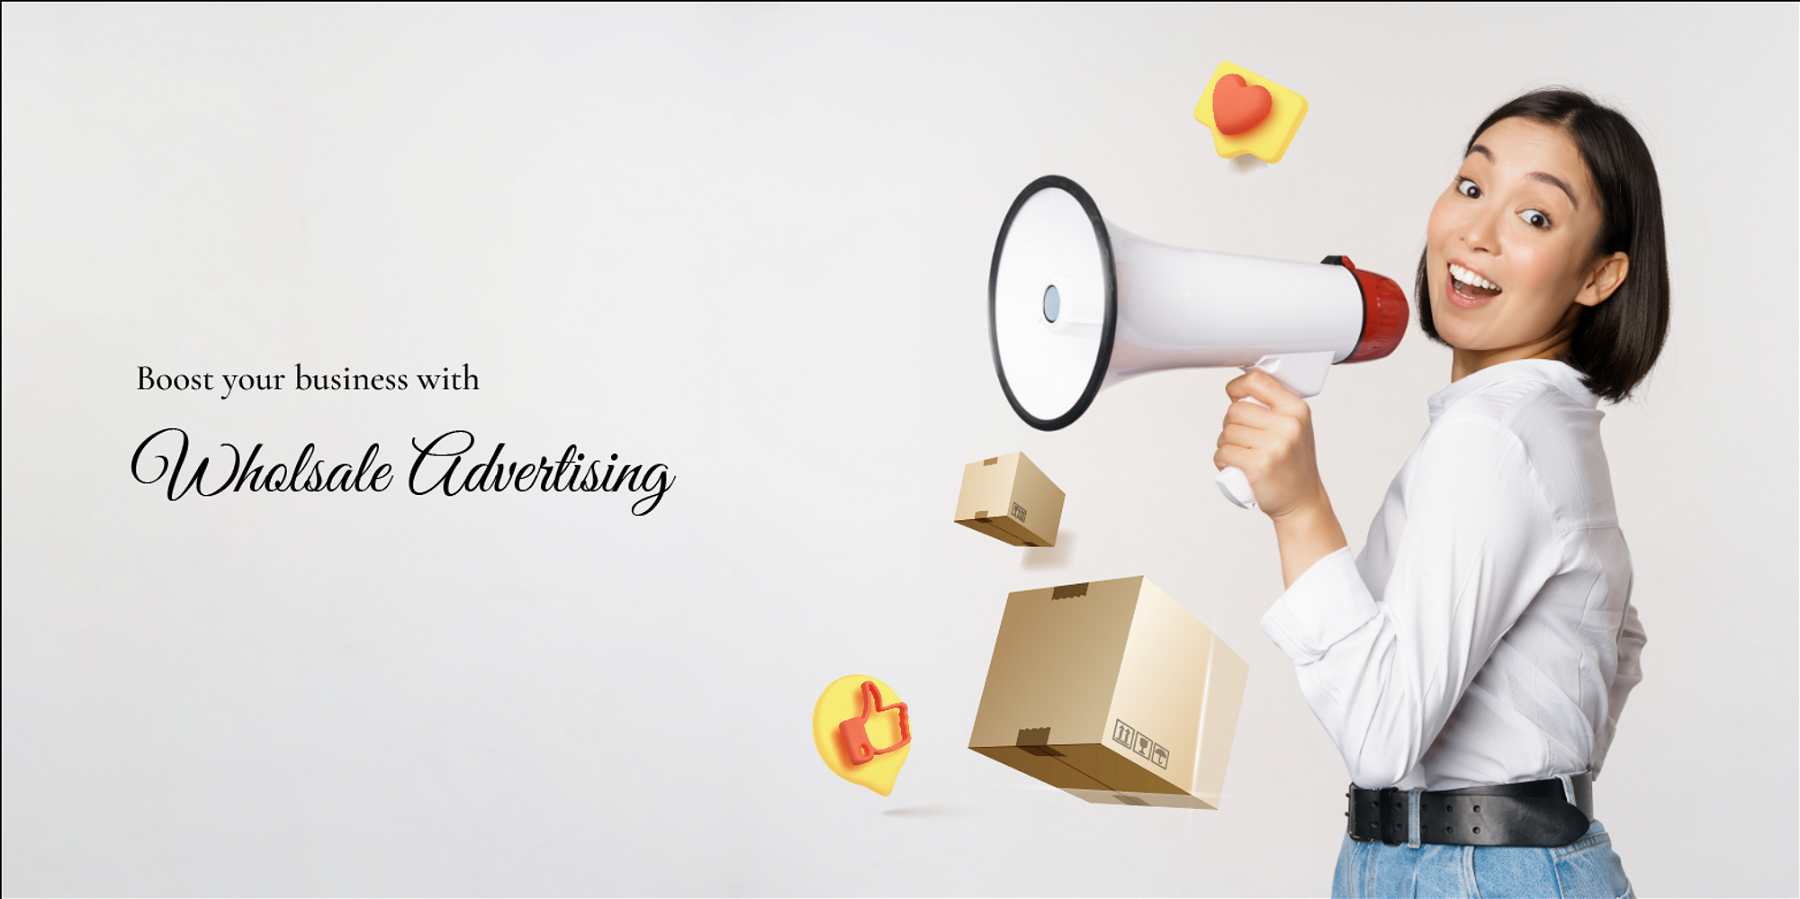 Boost your business with wholesale advertising